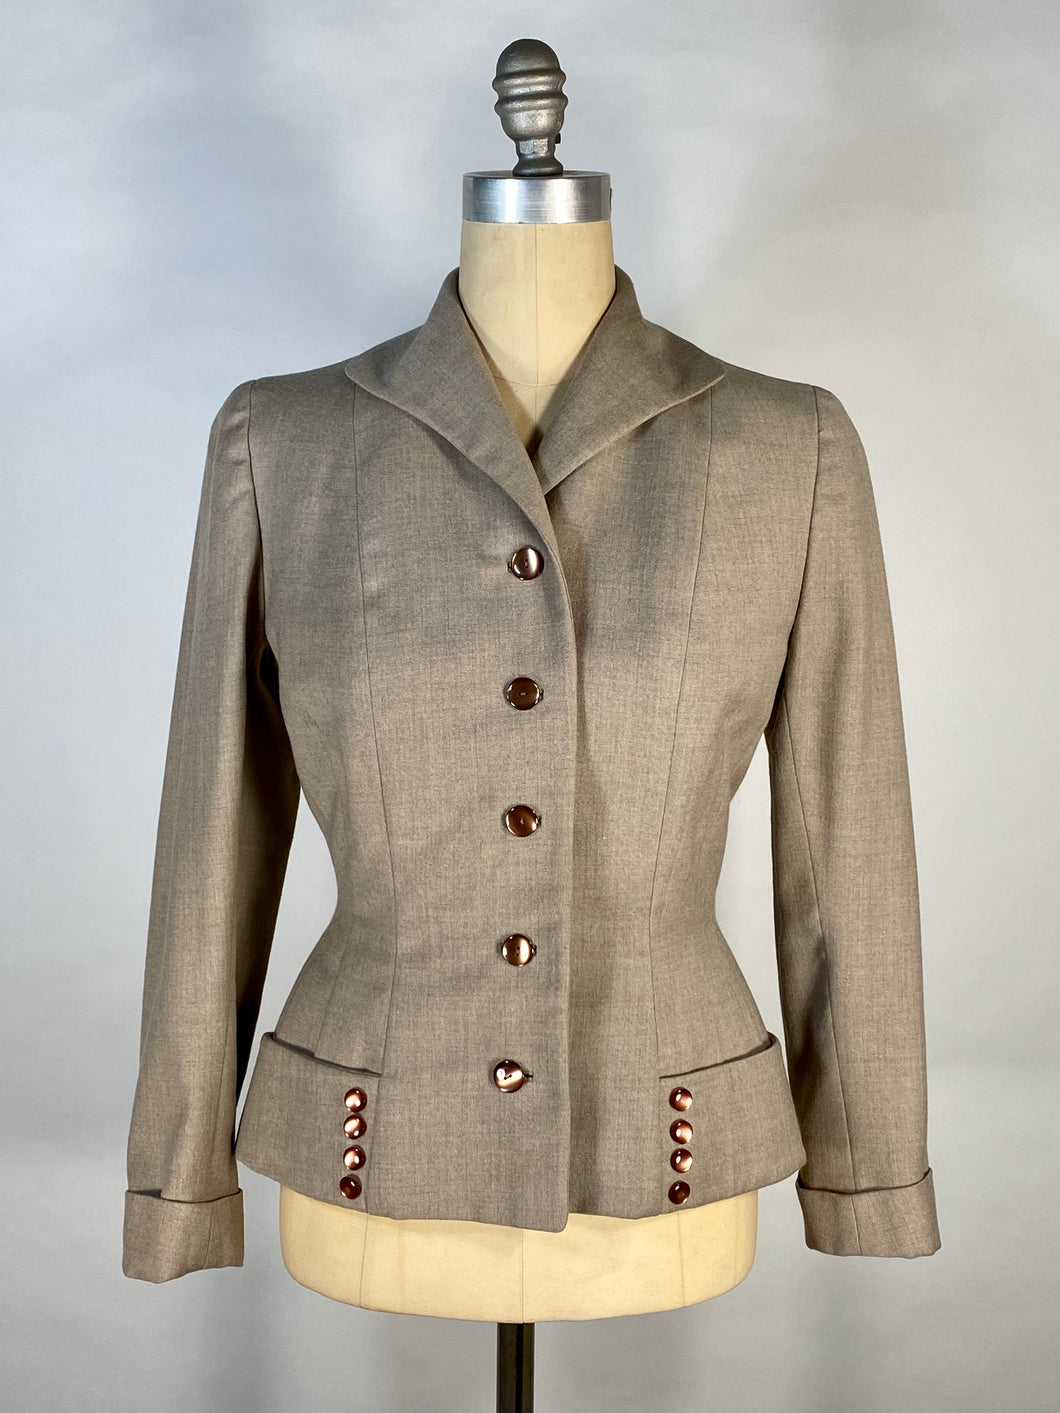 1940's TAILORED beige tan wool blazer suit jacket size Small to Medium NEAR MINT condition